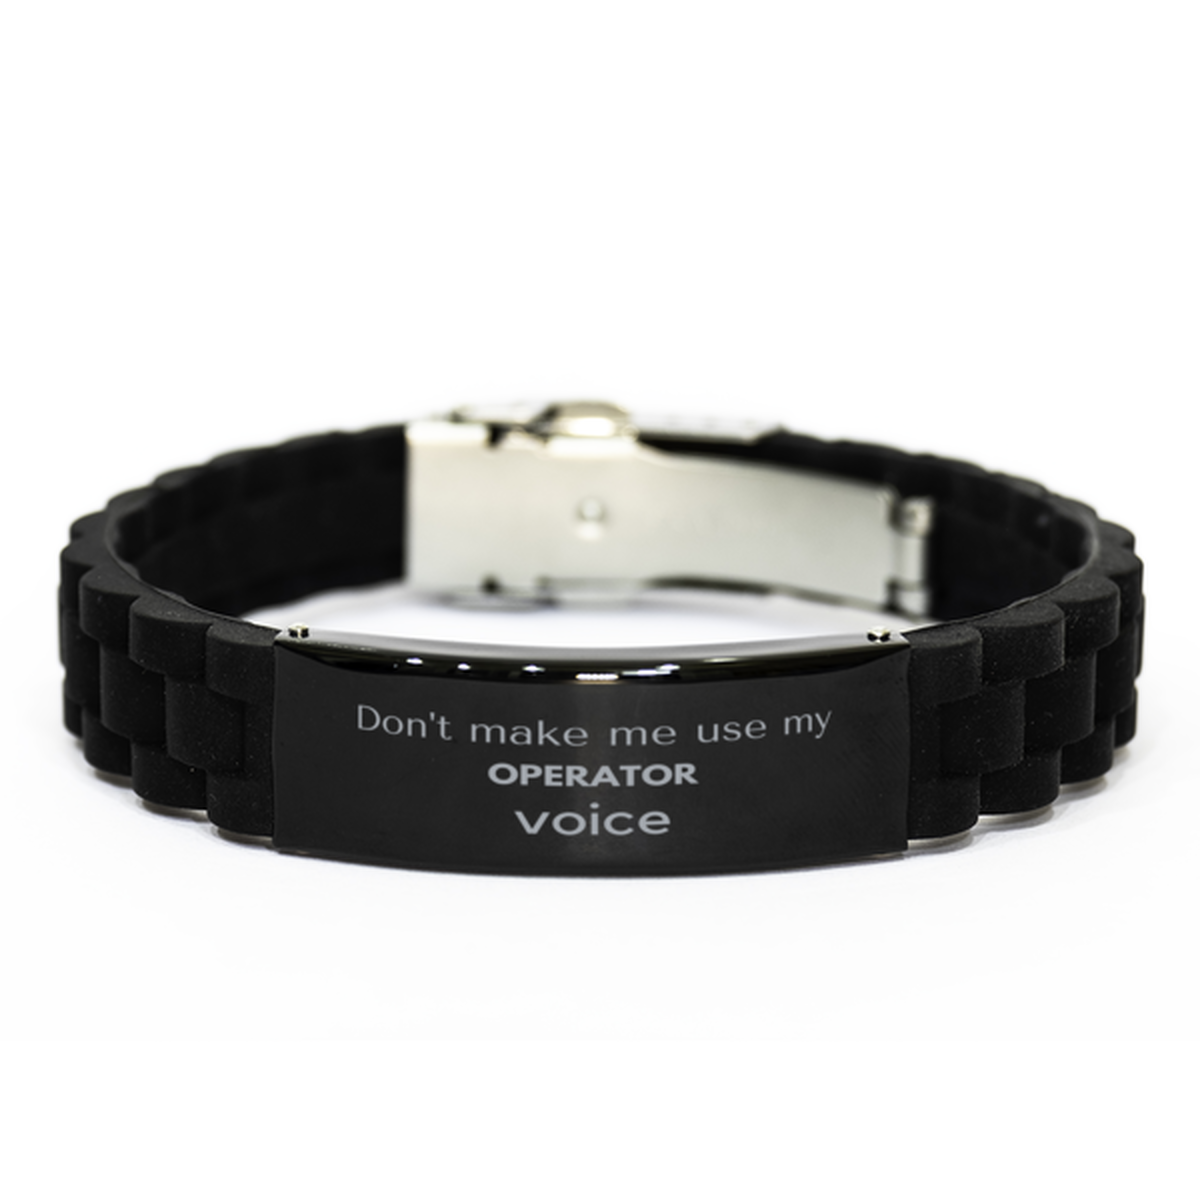 Don't make me use my Operator voice, Sarcasm Operator Gifts, Christmas Operator Black Glidelock Clasp Bracelet Birthday Unique Gifts For Operator Coworkers, Men, Women, Colleague, Friends